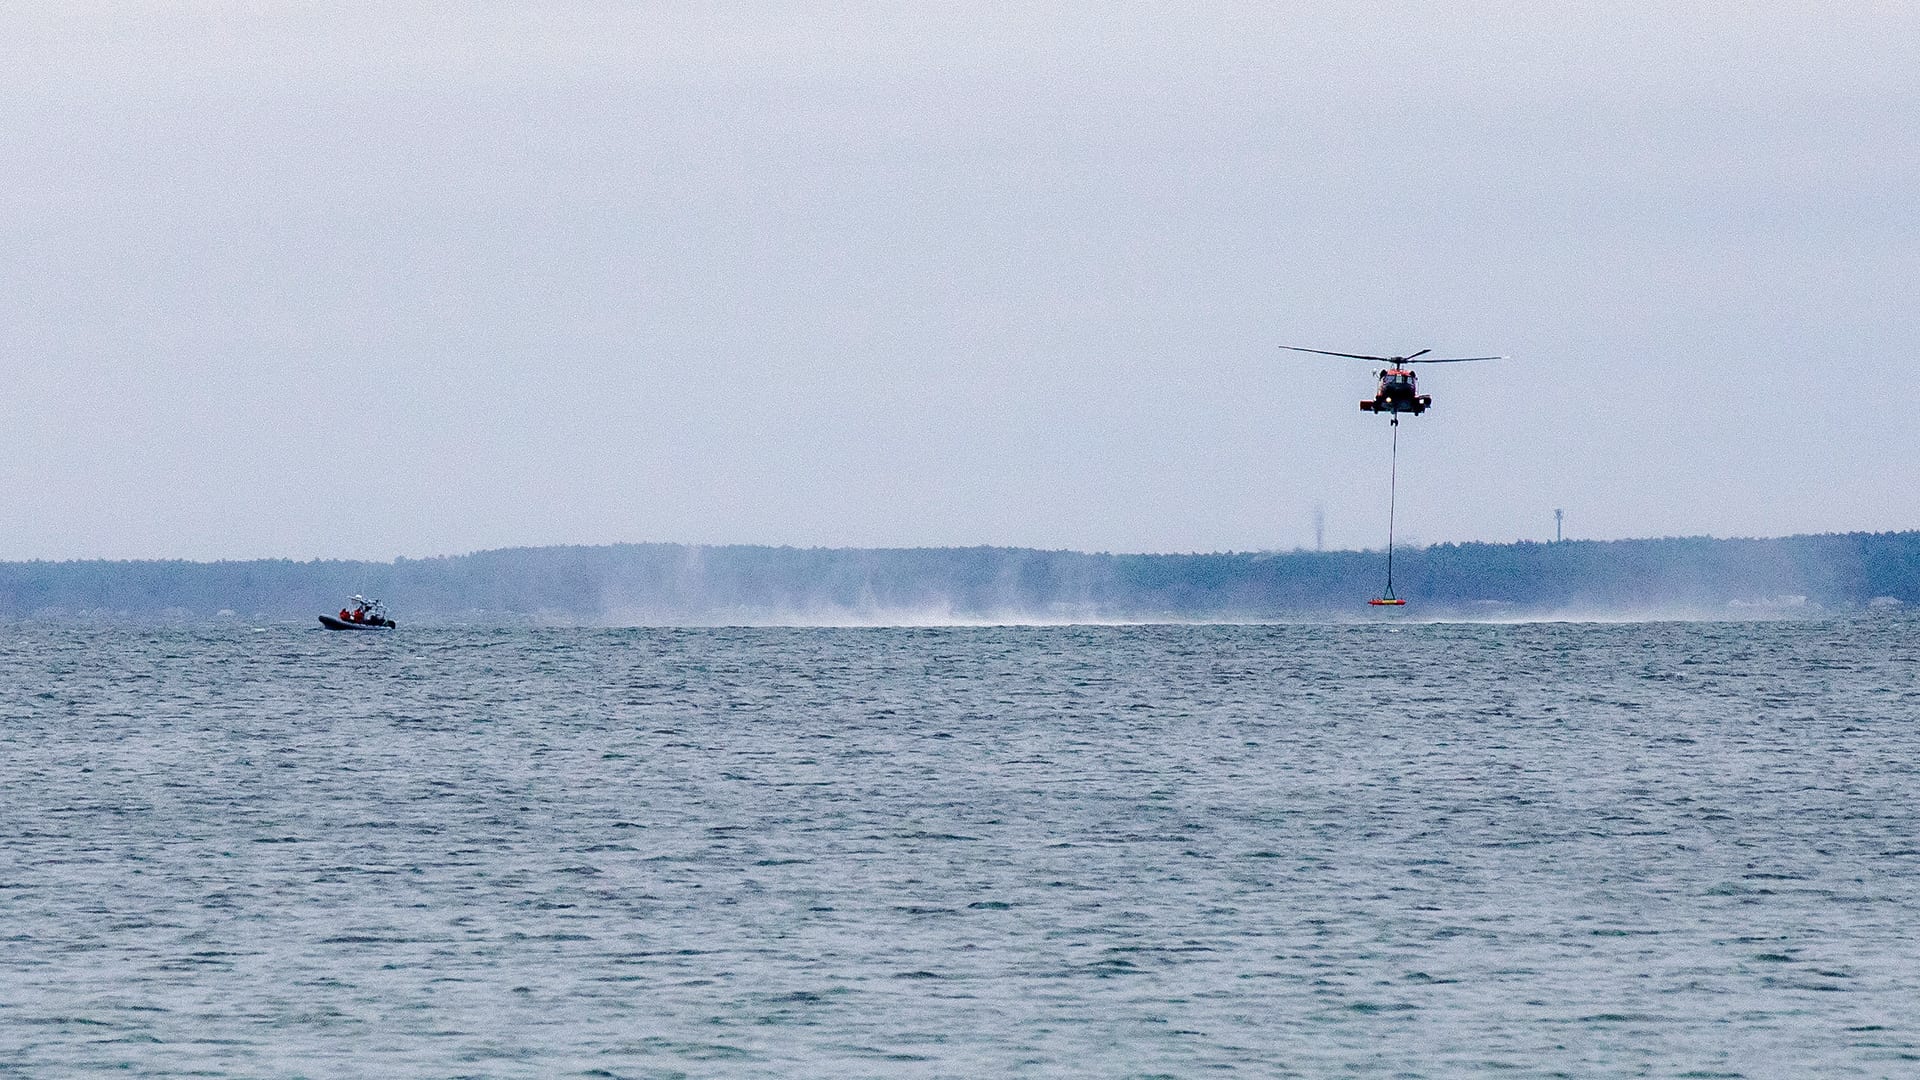 A USCG Jayhawk helicopter releases LRAUV near the Scibotics Team aboard a Zodiac in Buzzards Bay, where the team can inspect the vehicle's systems underwater. (Jayne Doucette, © Woods Hole Oceanographic Institution)